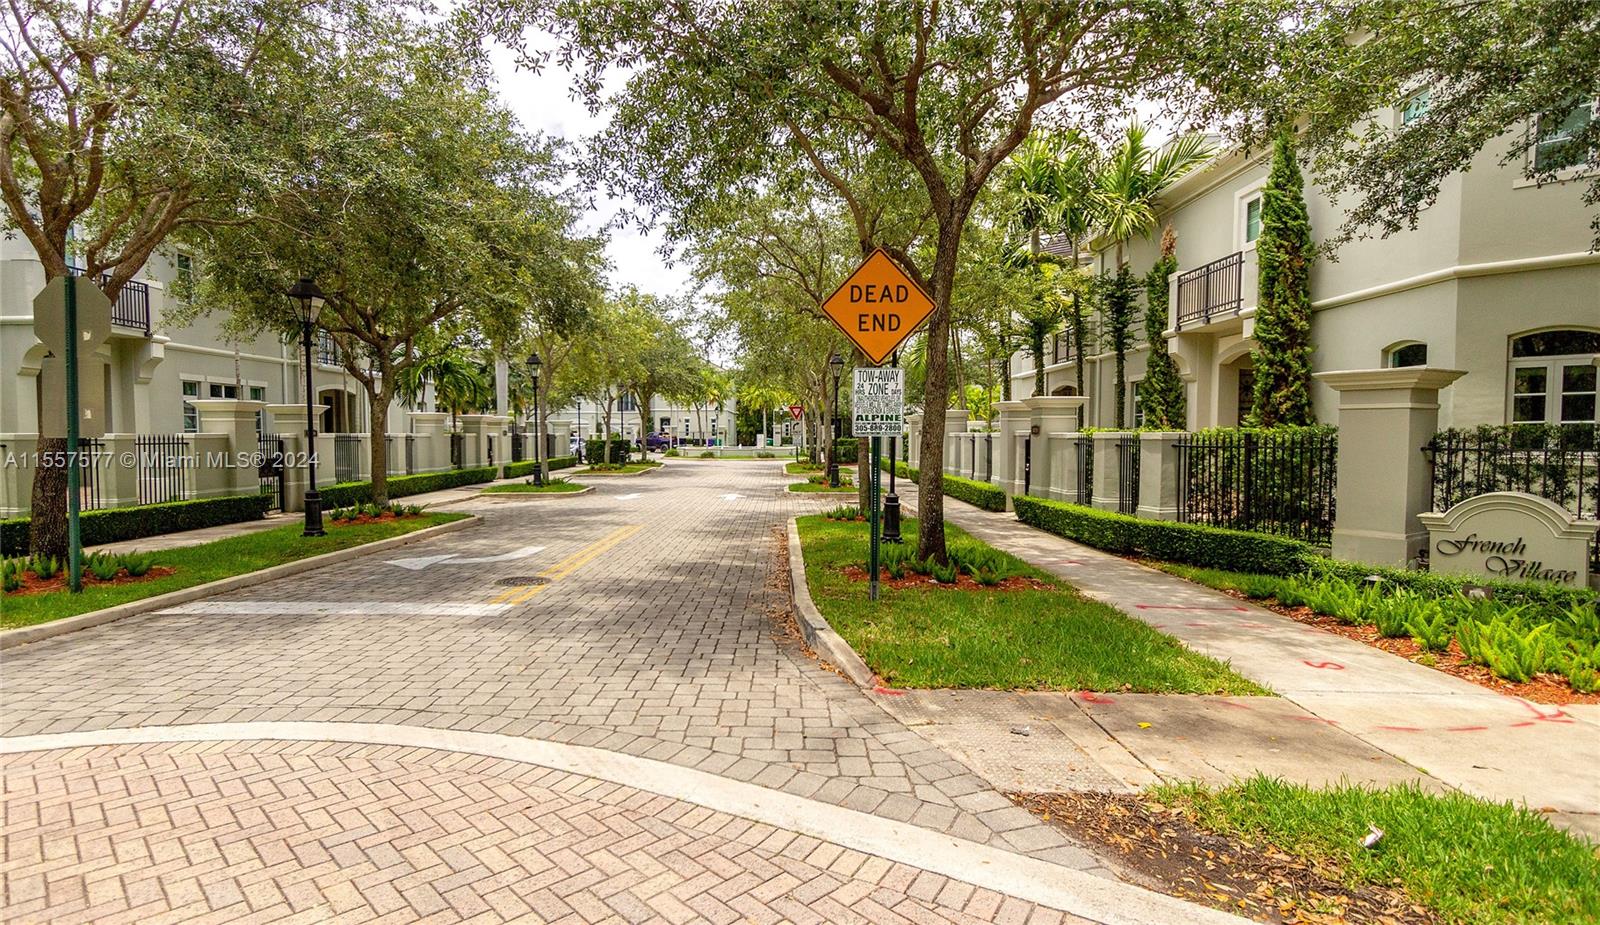 View Pinecrest, FL 33156 townhome